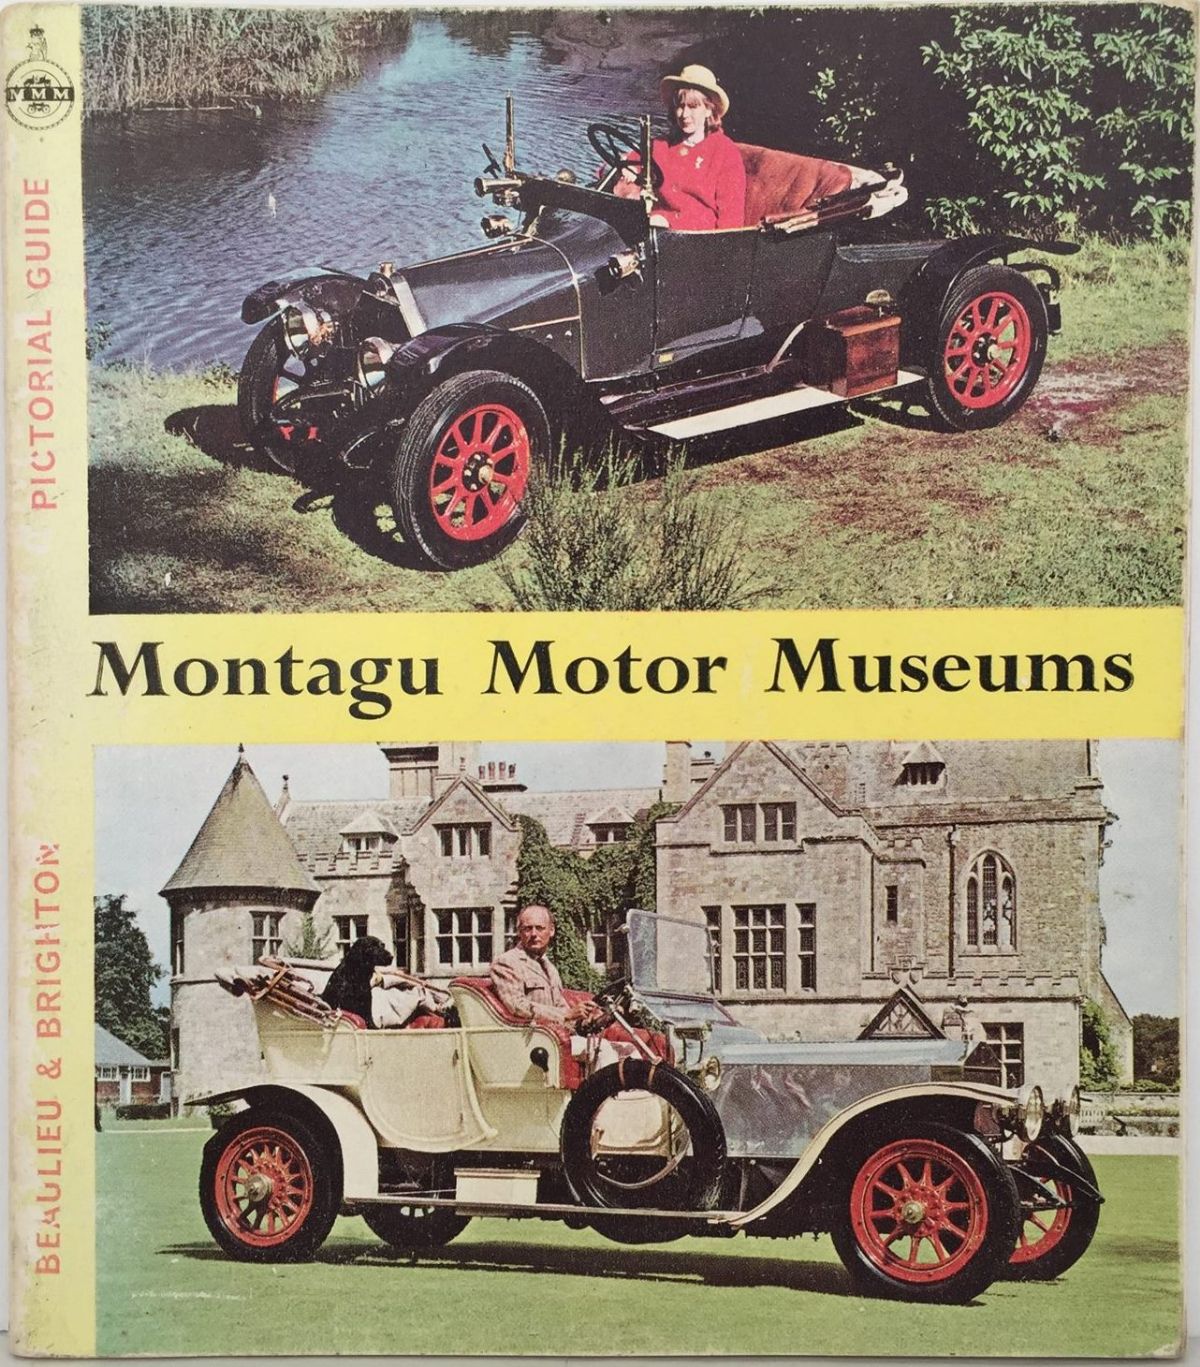 MONTAGU MOTOR MUSEUMS: Beaulieu and Brighton 1966-1967 Pictorial Guide